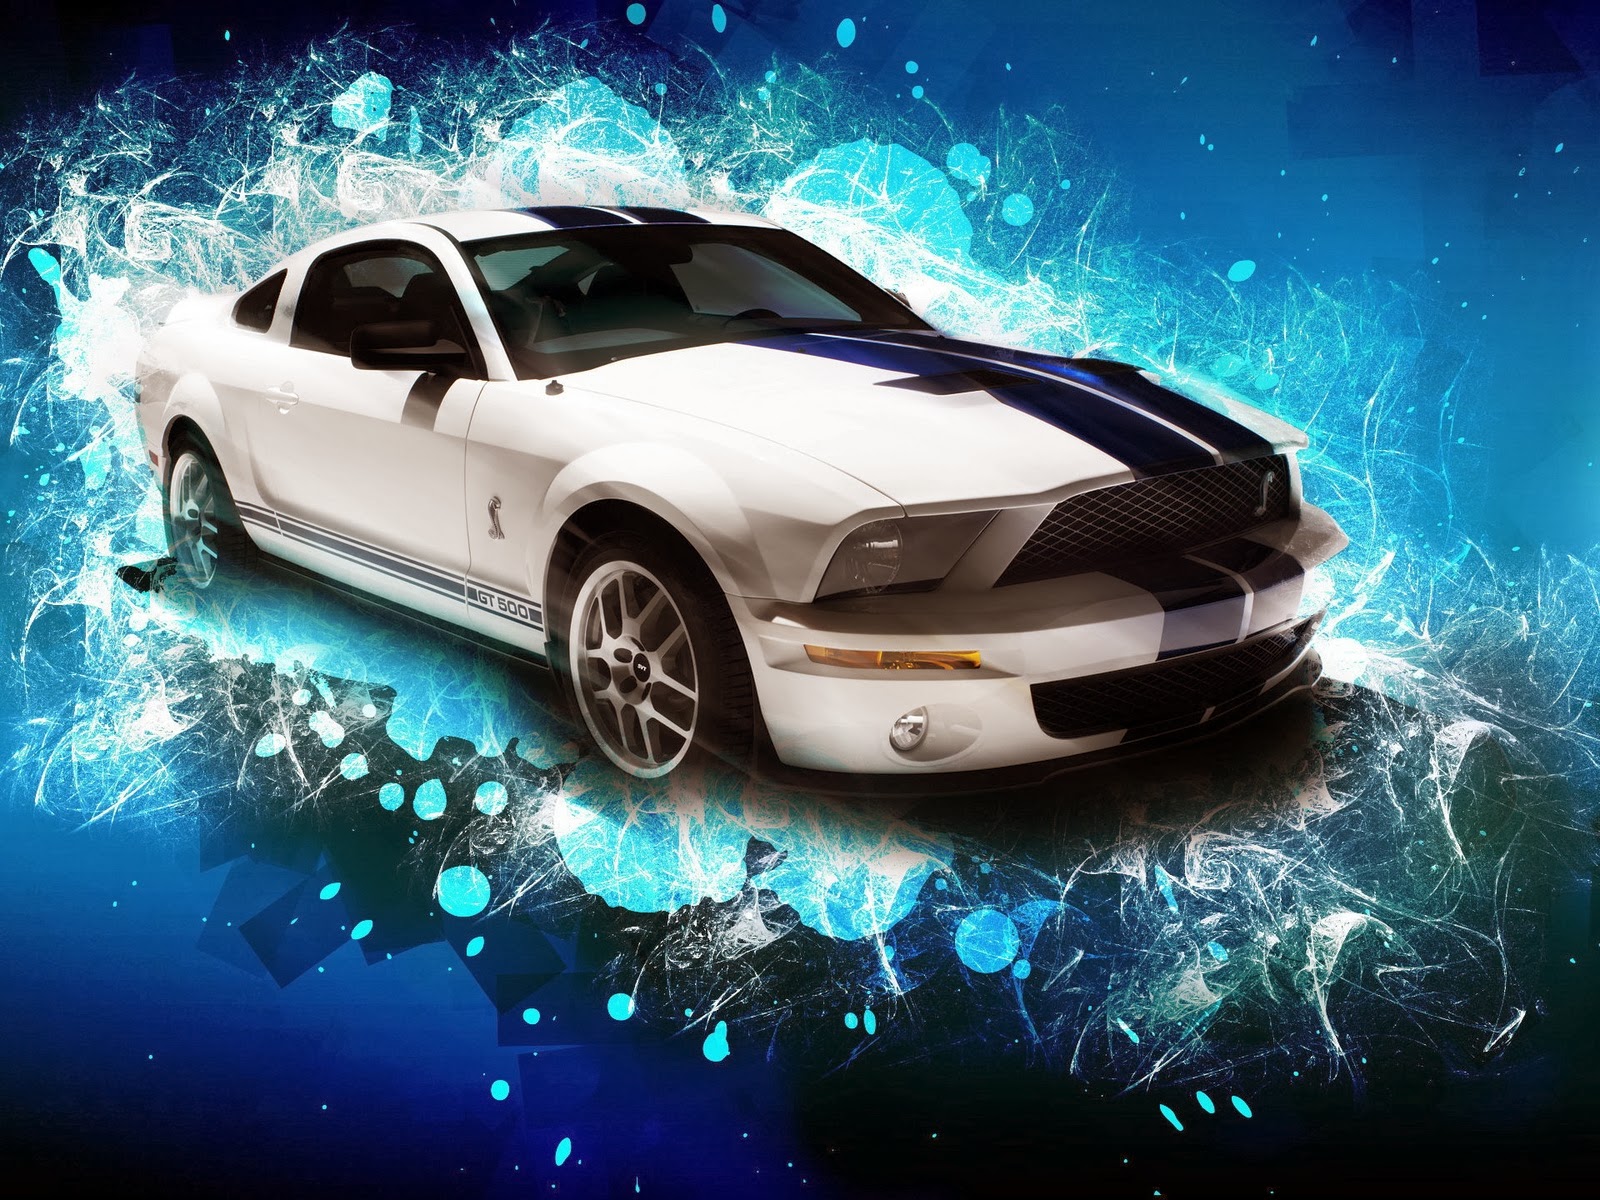 http://www.crazywallpapers.in/2014/02/cars-hd-best-wallpapers.html